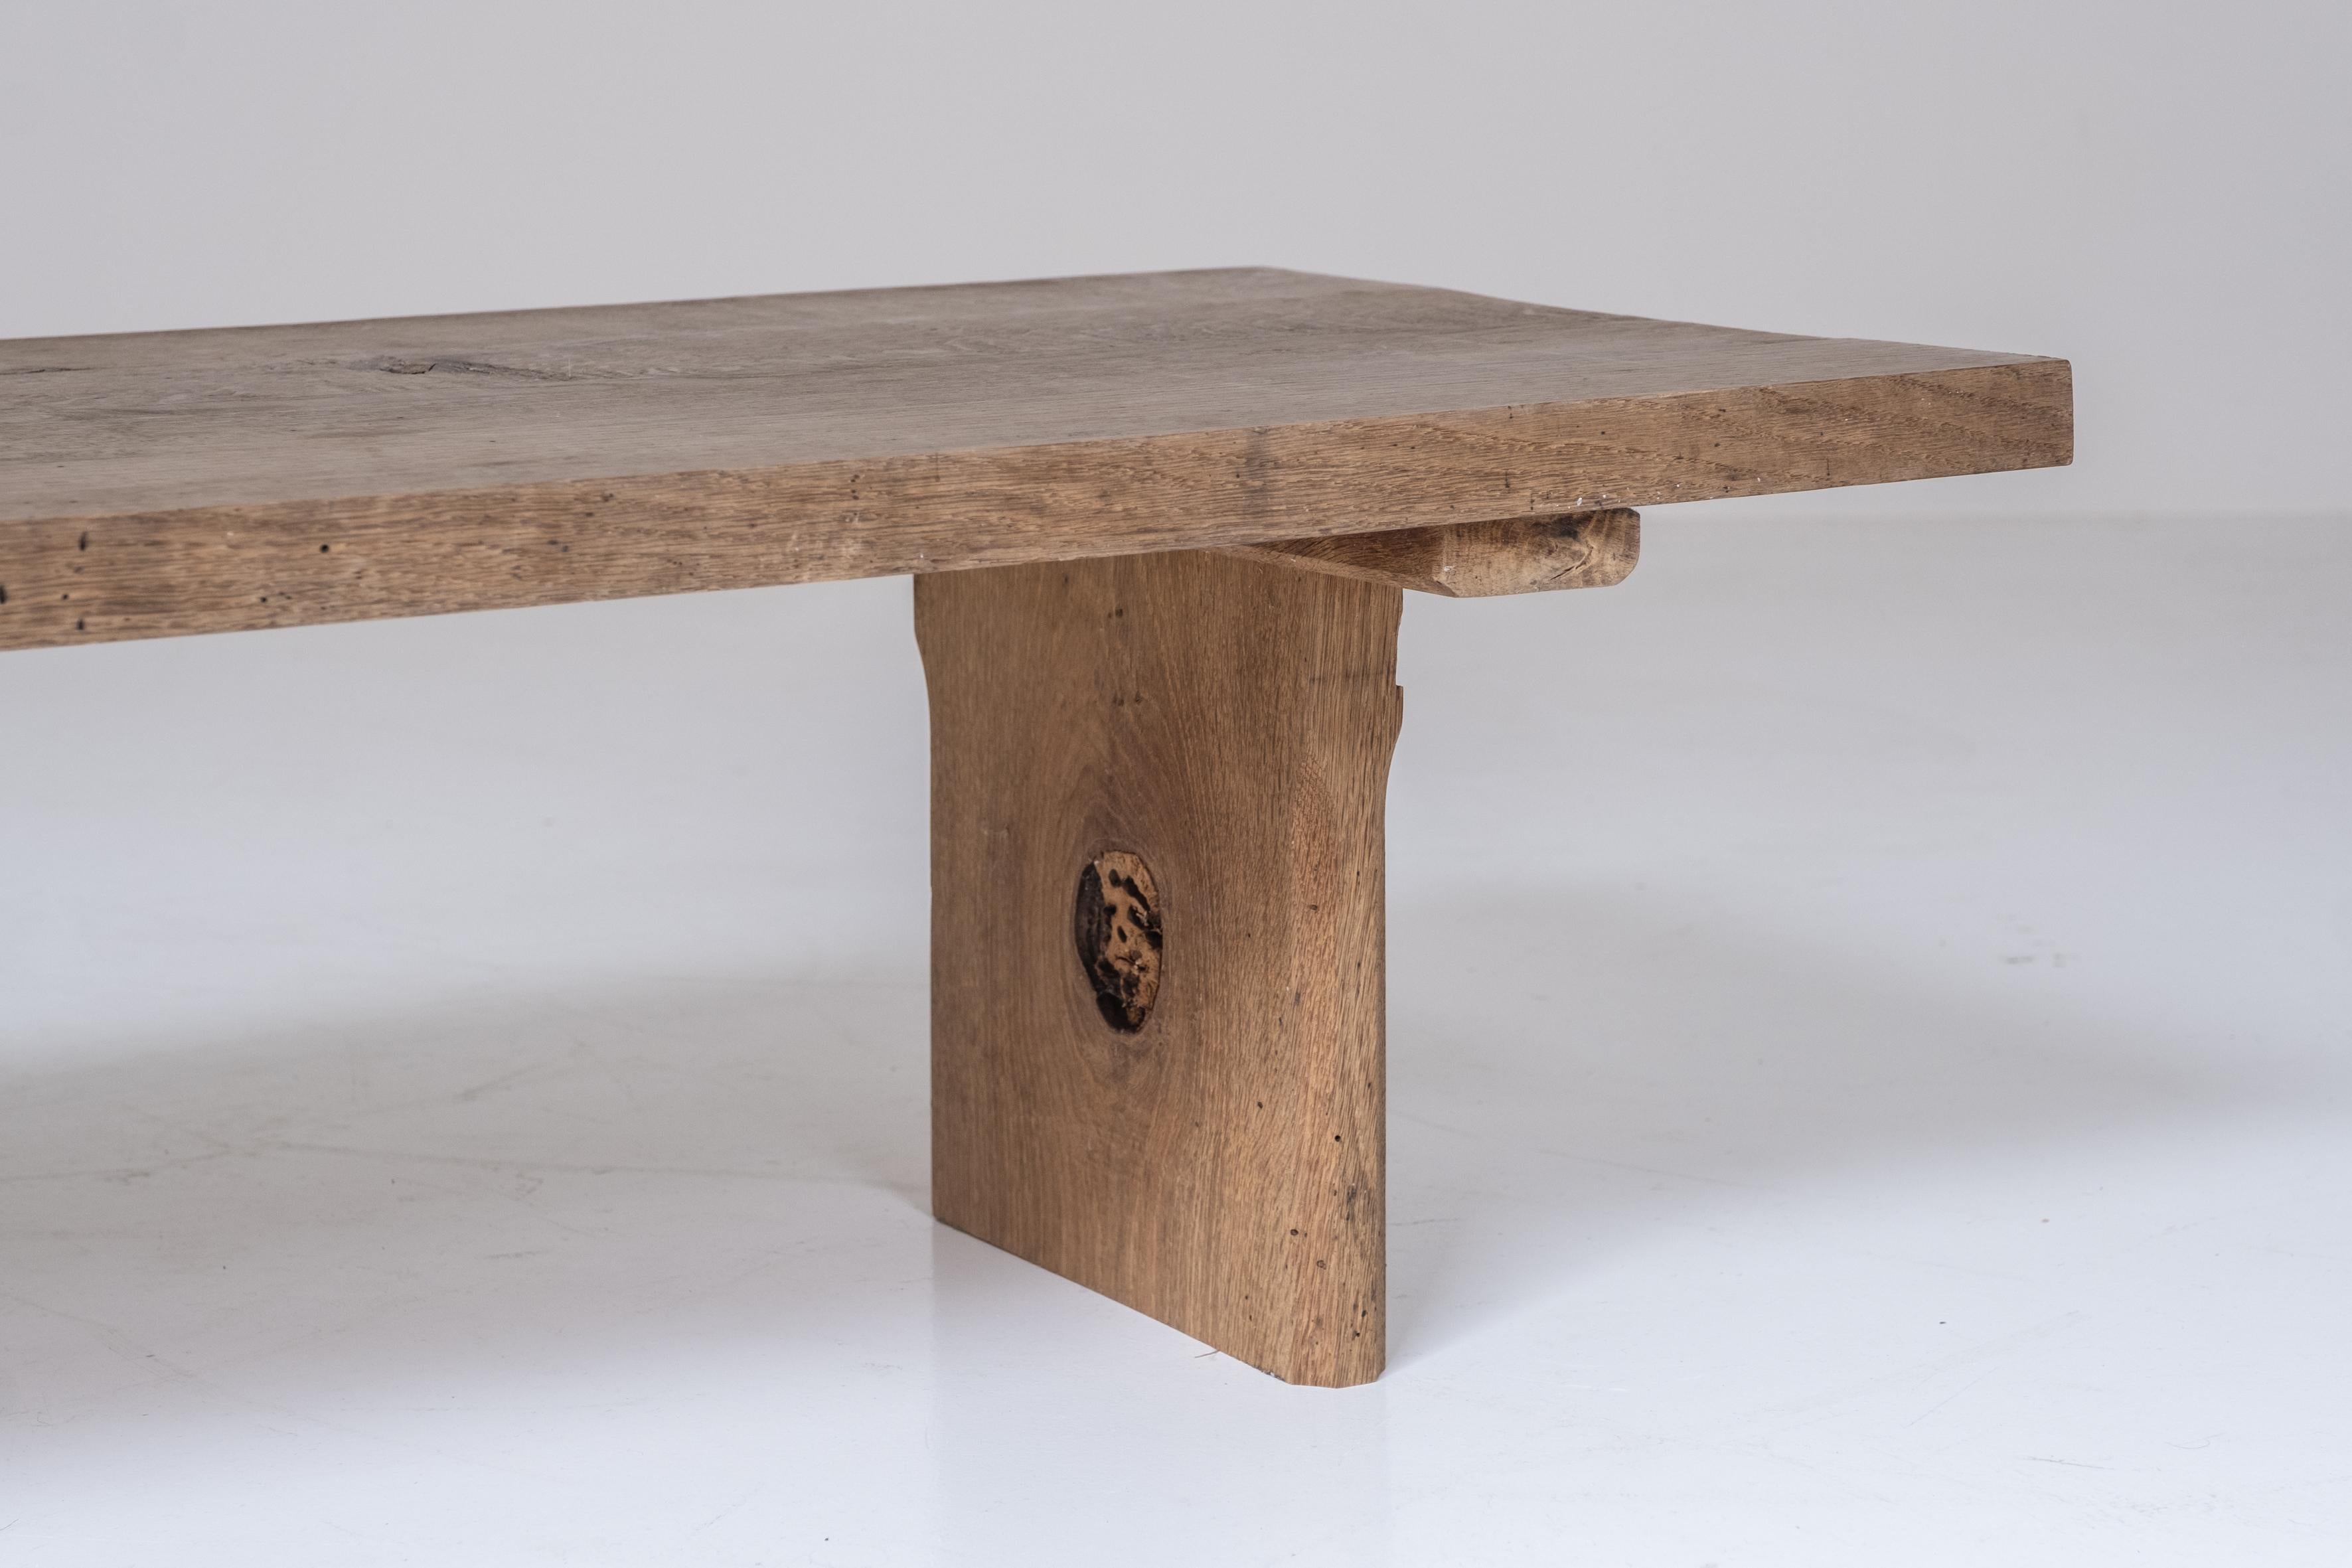 Elm Low rustic coffee table from France, designed and handmade in the 1950s.